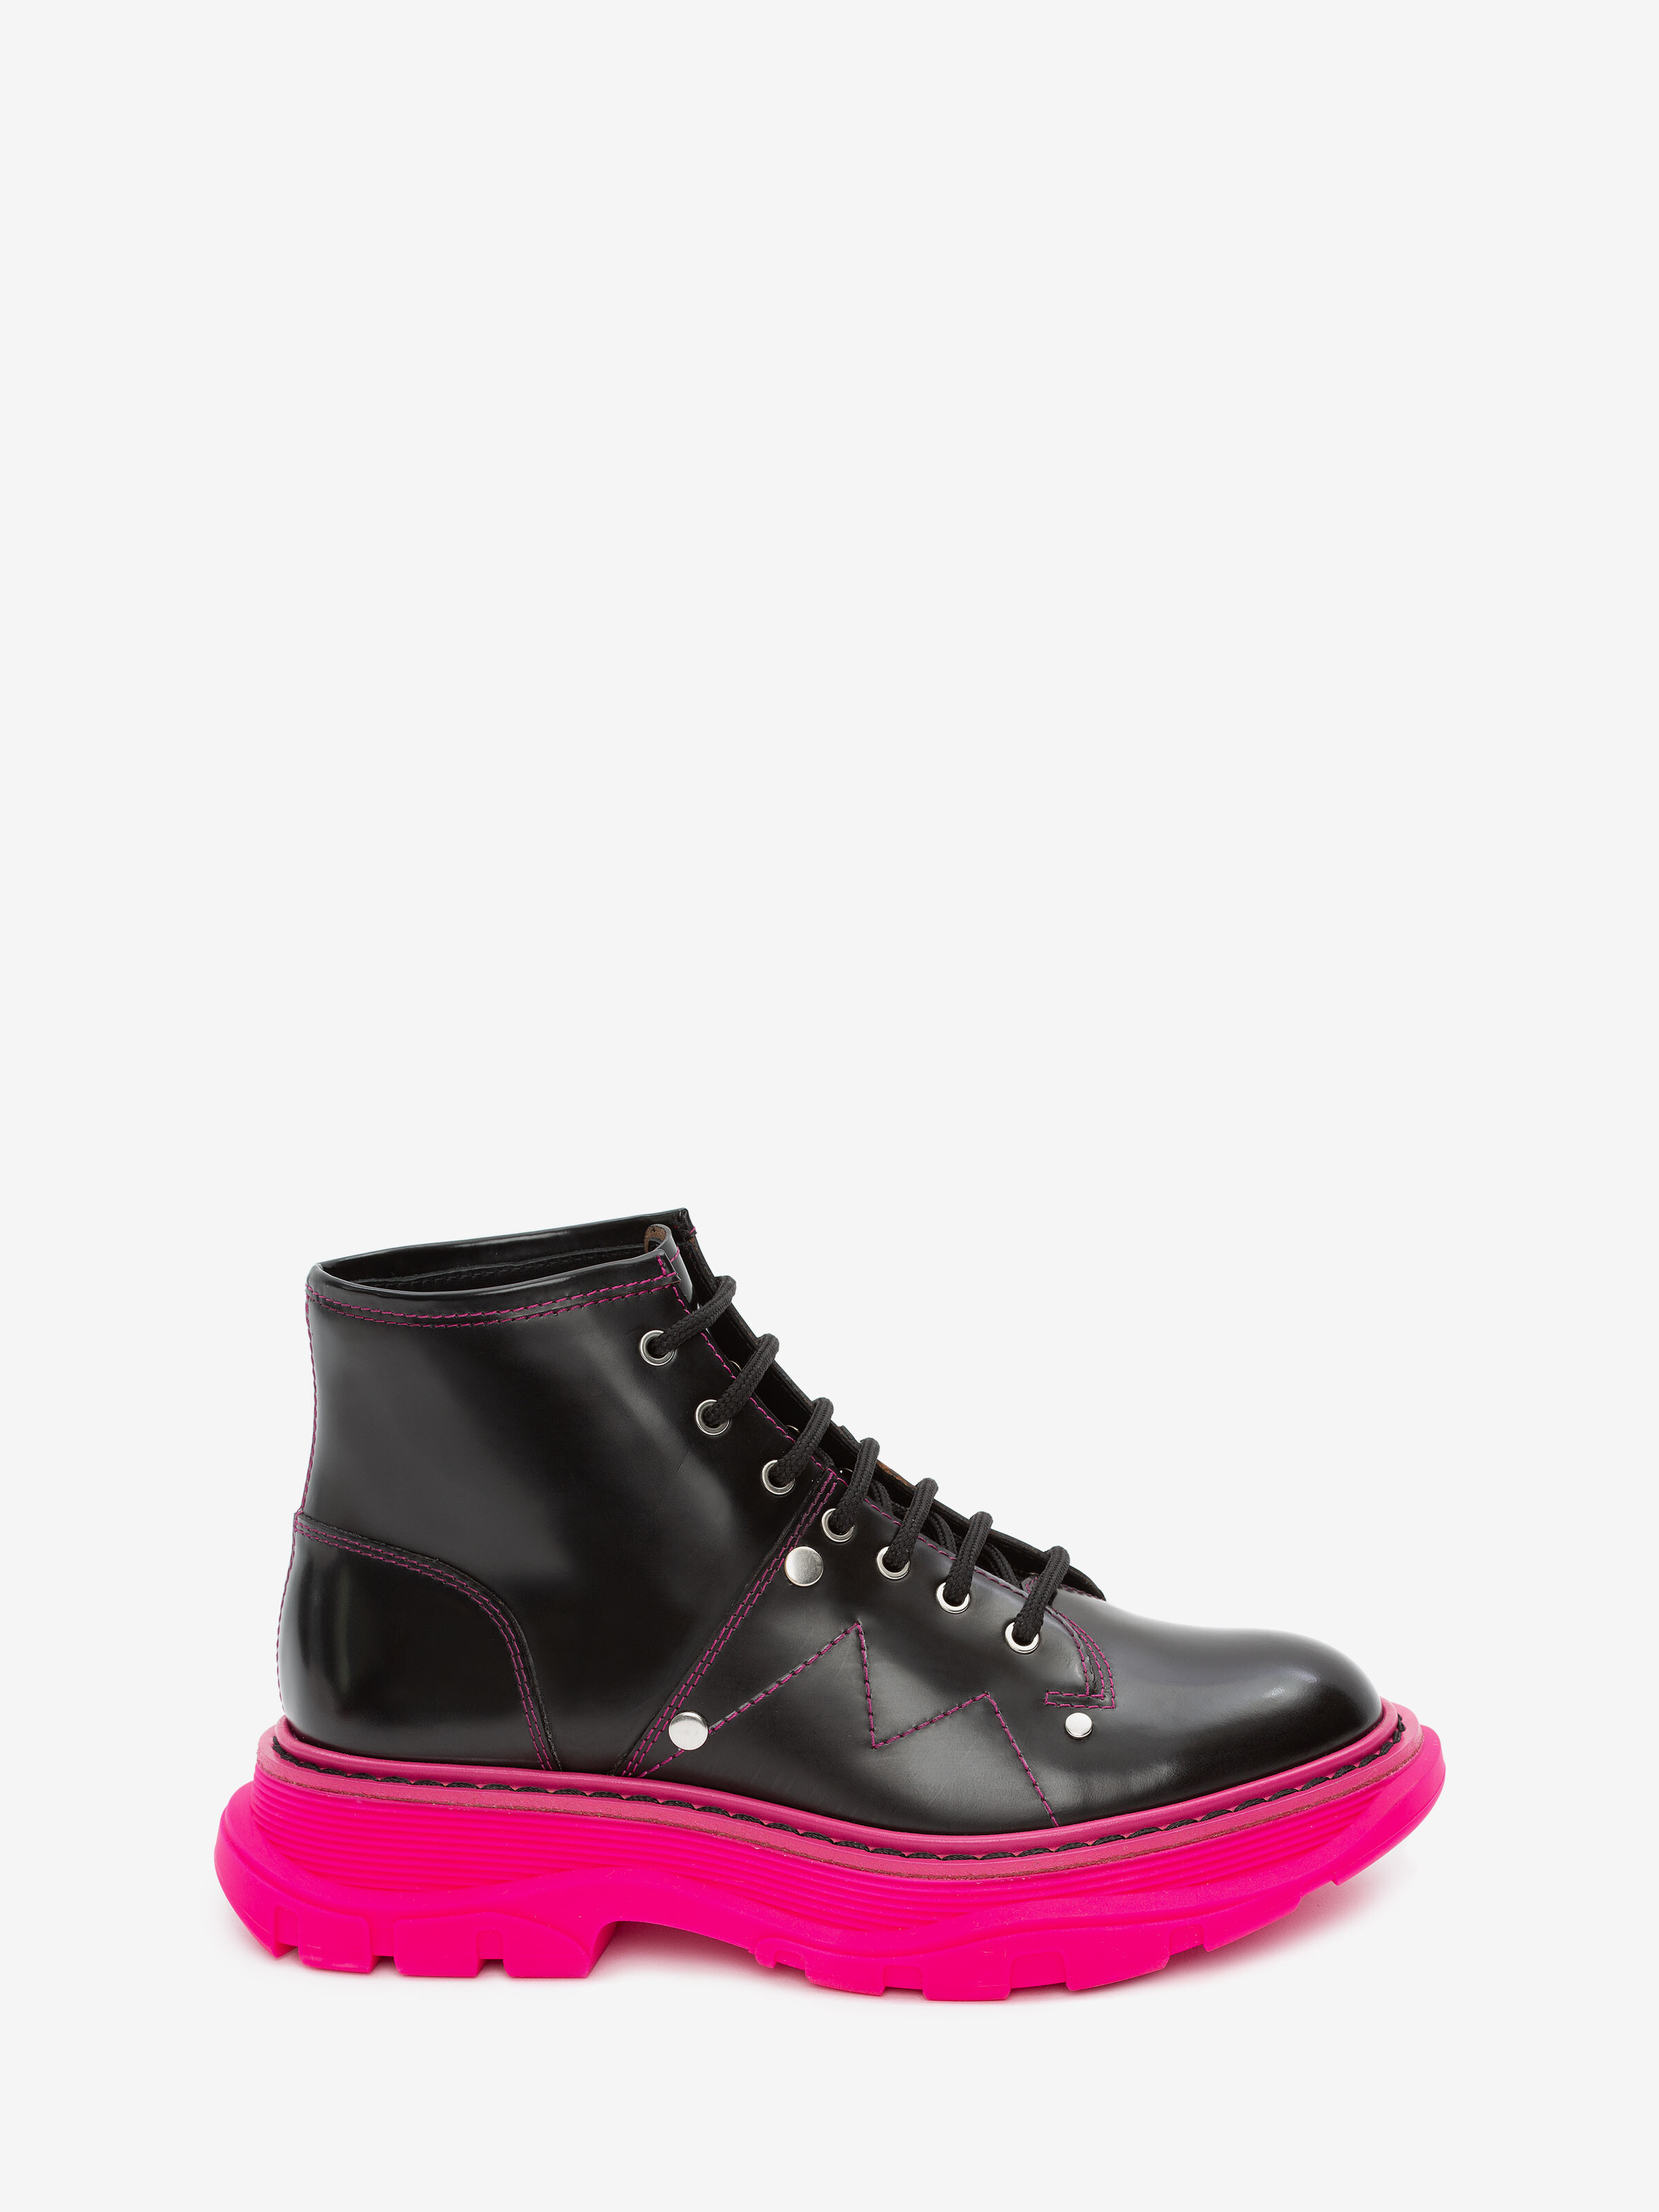 Alexander Mcqueen Tread Lace Up Boot In Black/orchid Pink